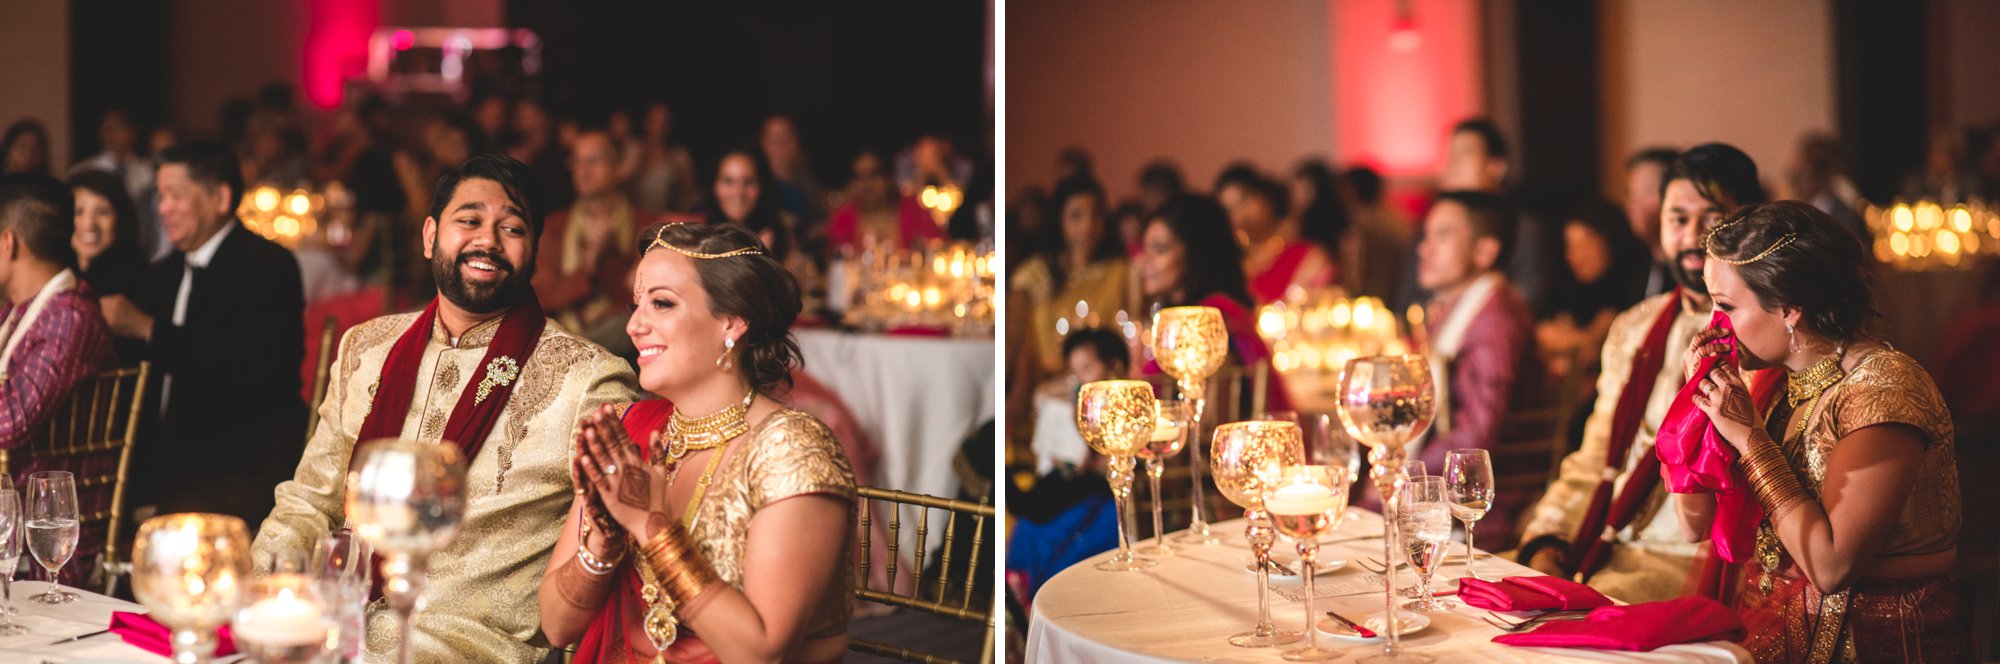 Washington DC colorful Indian wedding with a feminist bride. Reception.